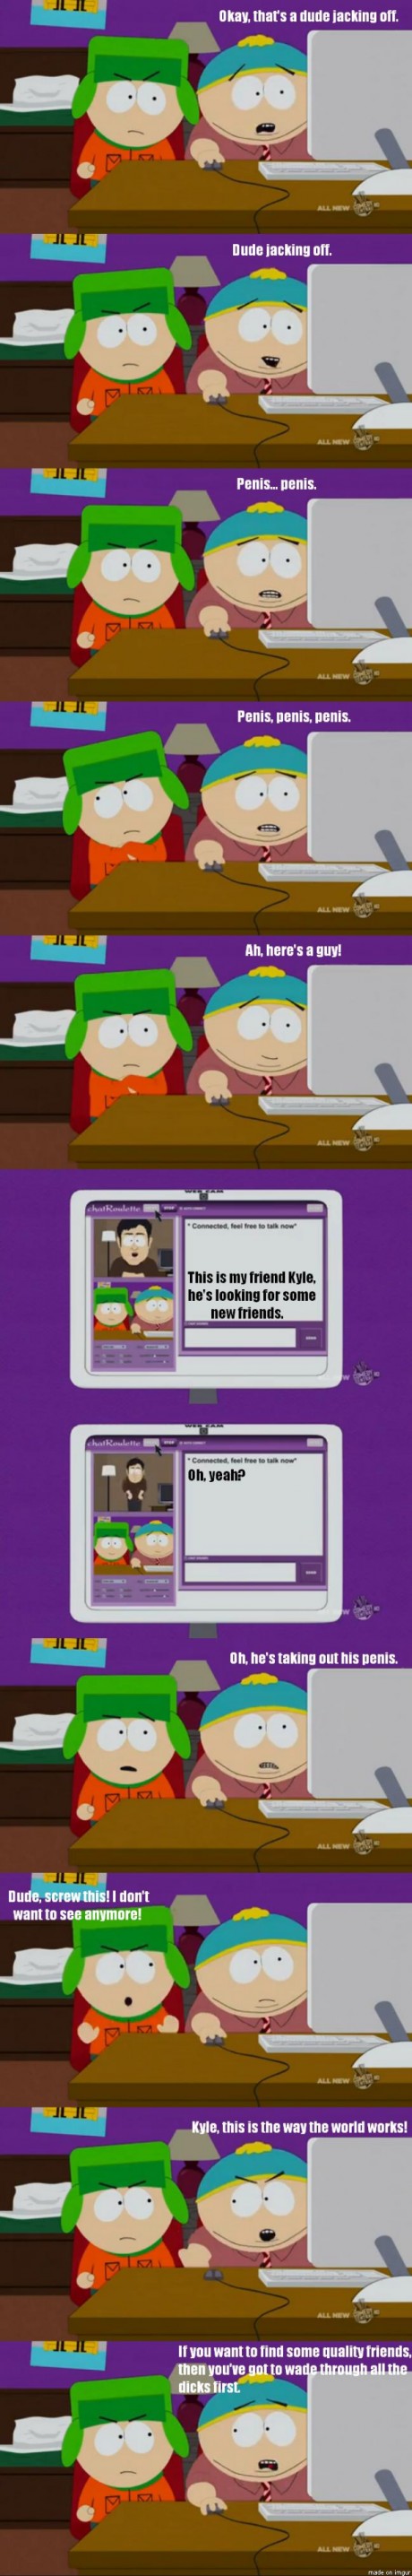 South Park on making friends on Omegle.